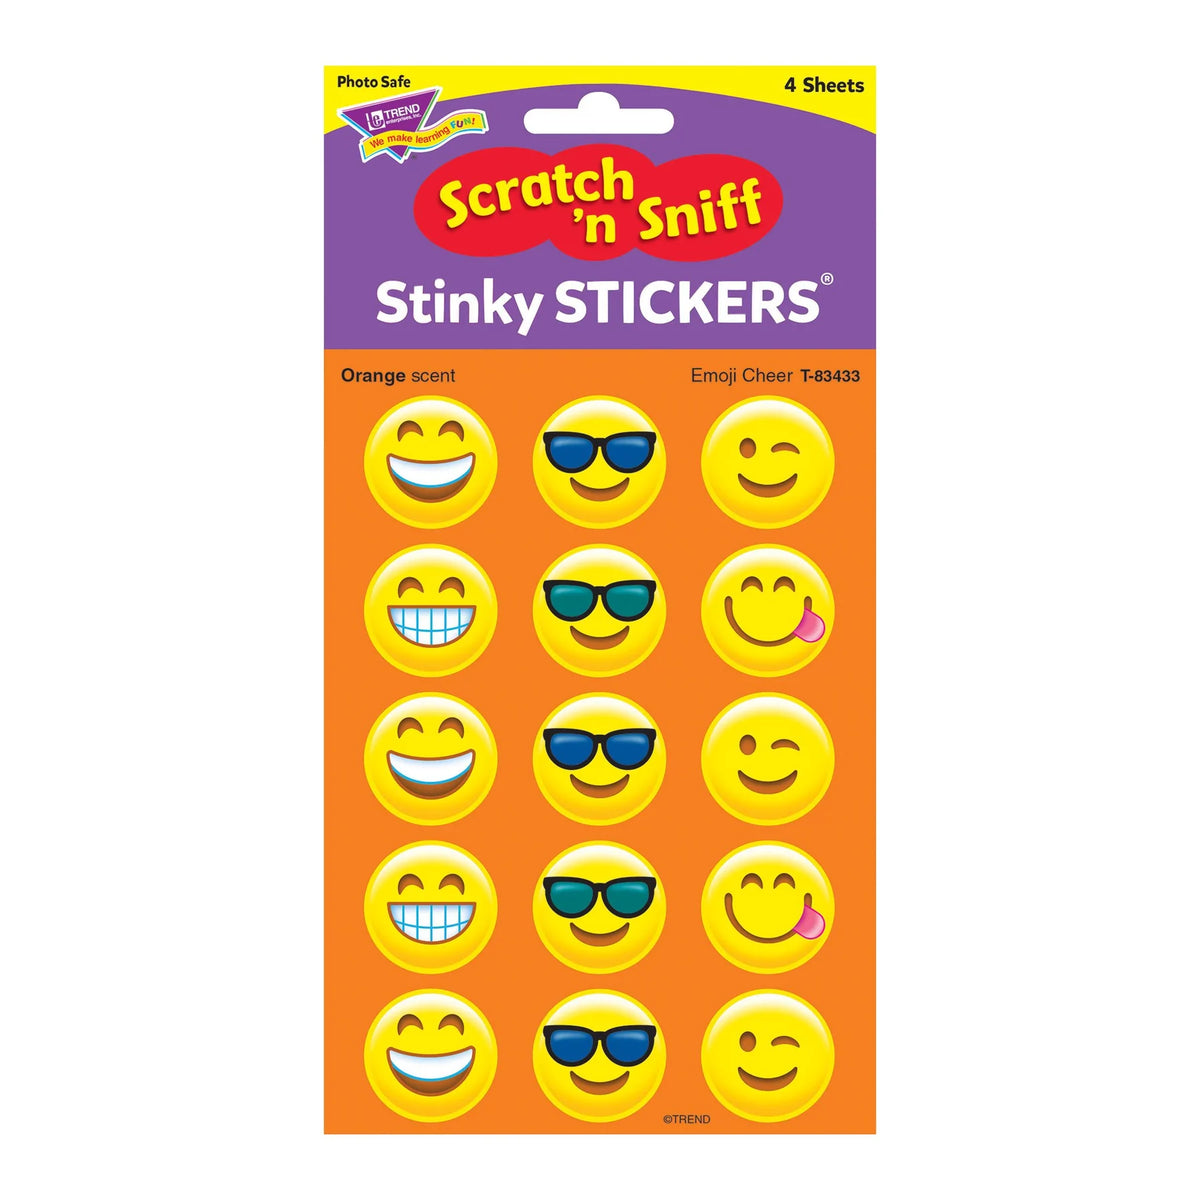 Emoji Cheer Scratch 'n Sniff Stinky Stickers Cover